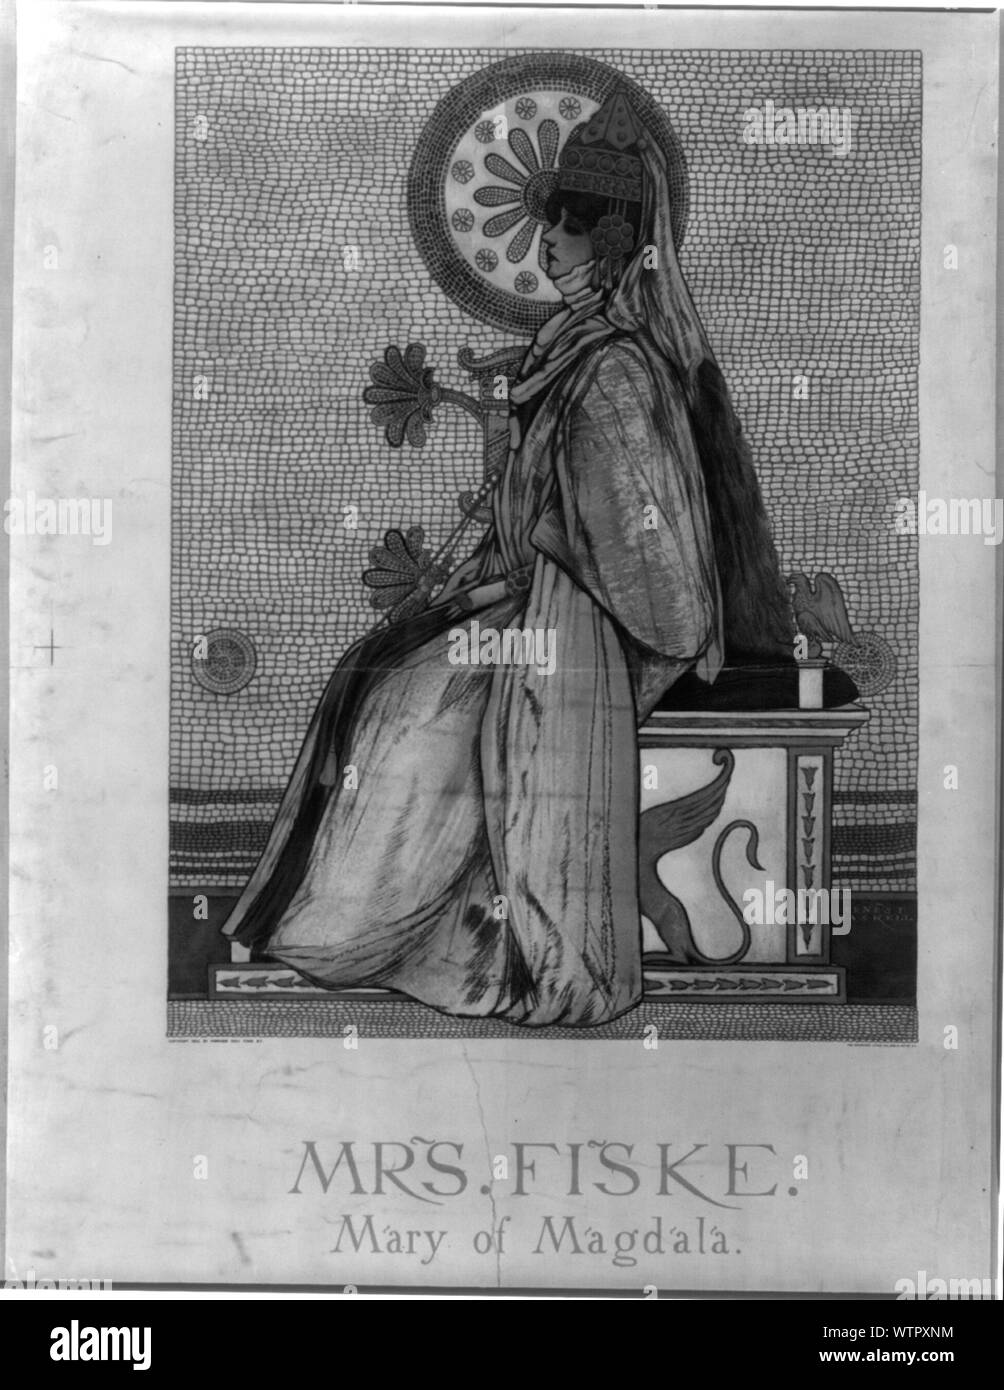 Mrs. Fiske - Mary of Magdala / Ernest Haskell. Stock Photo